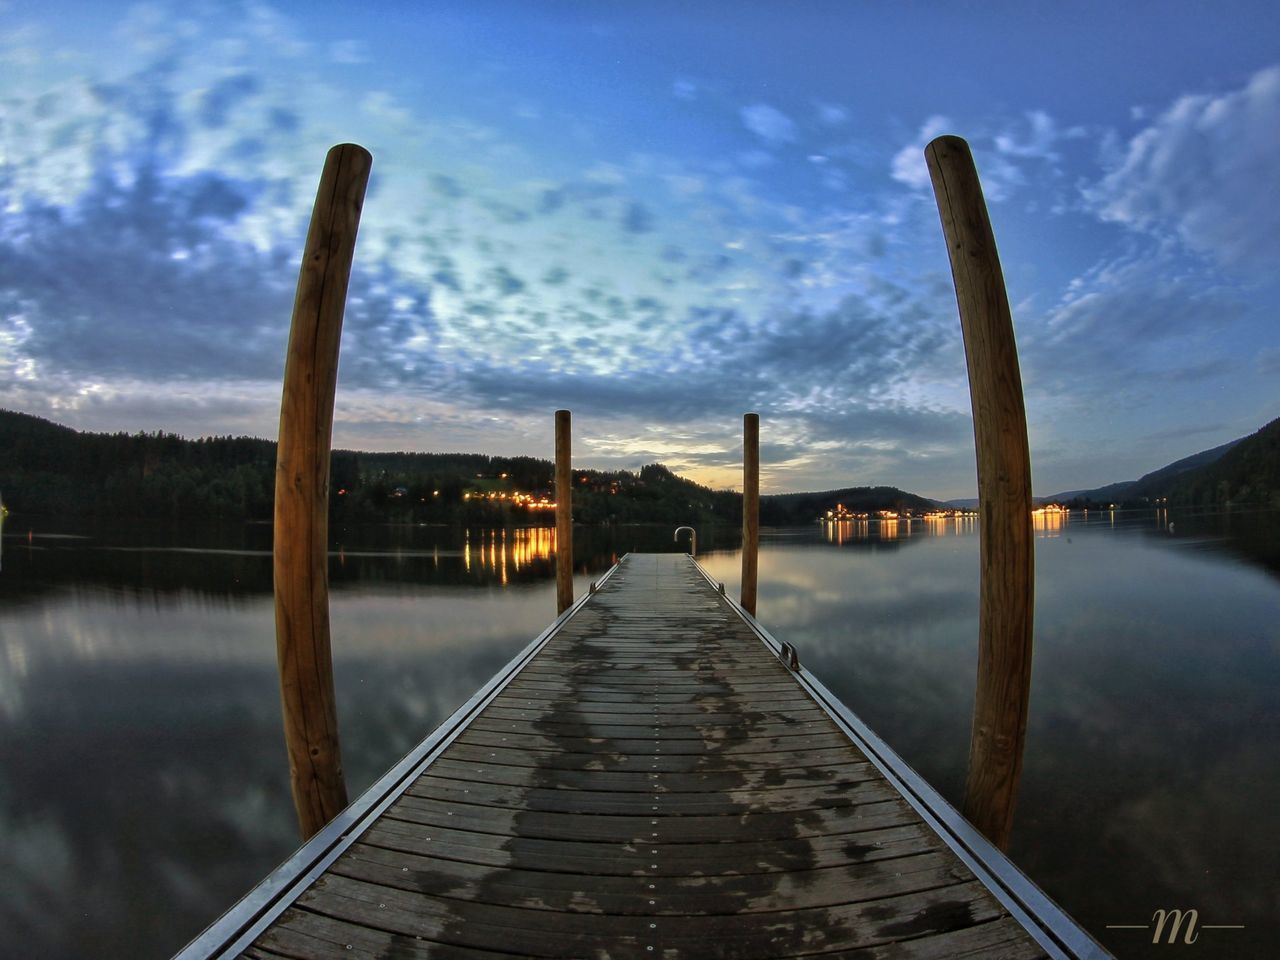 PIER BY LAKE AGAINST SKY